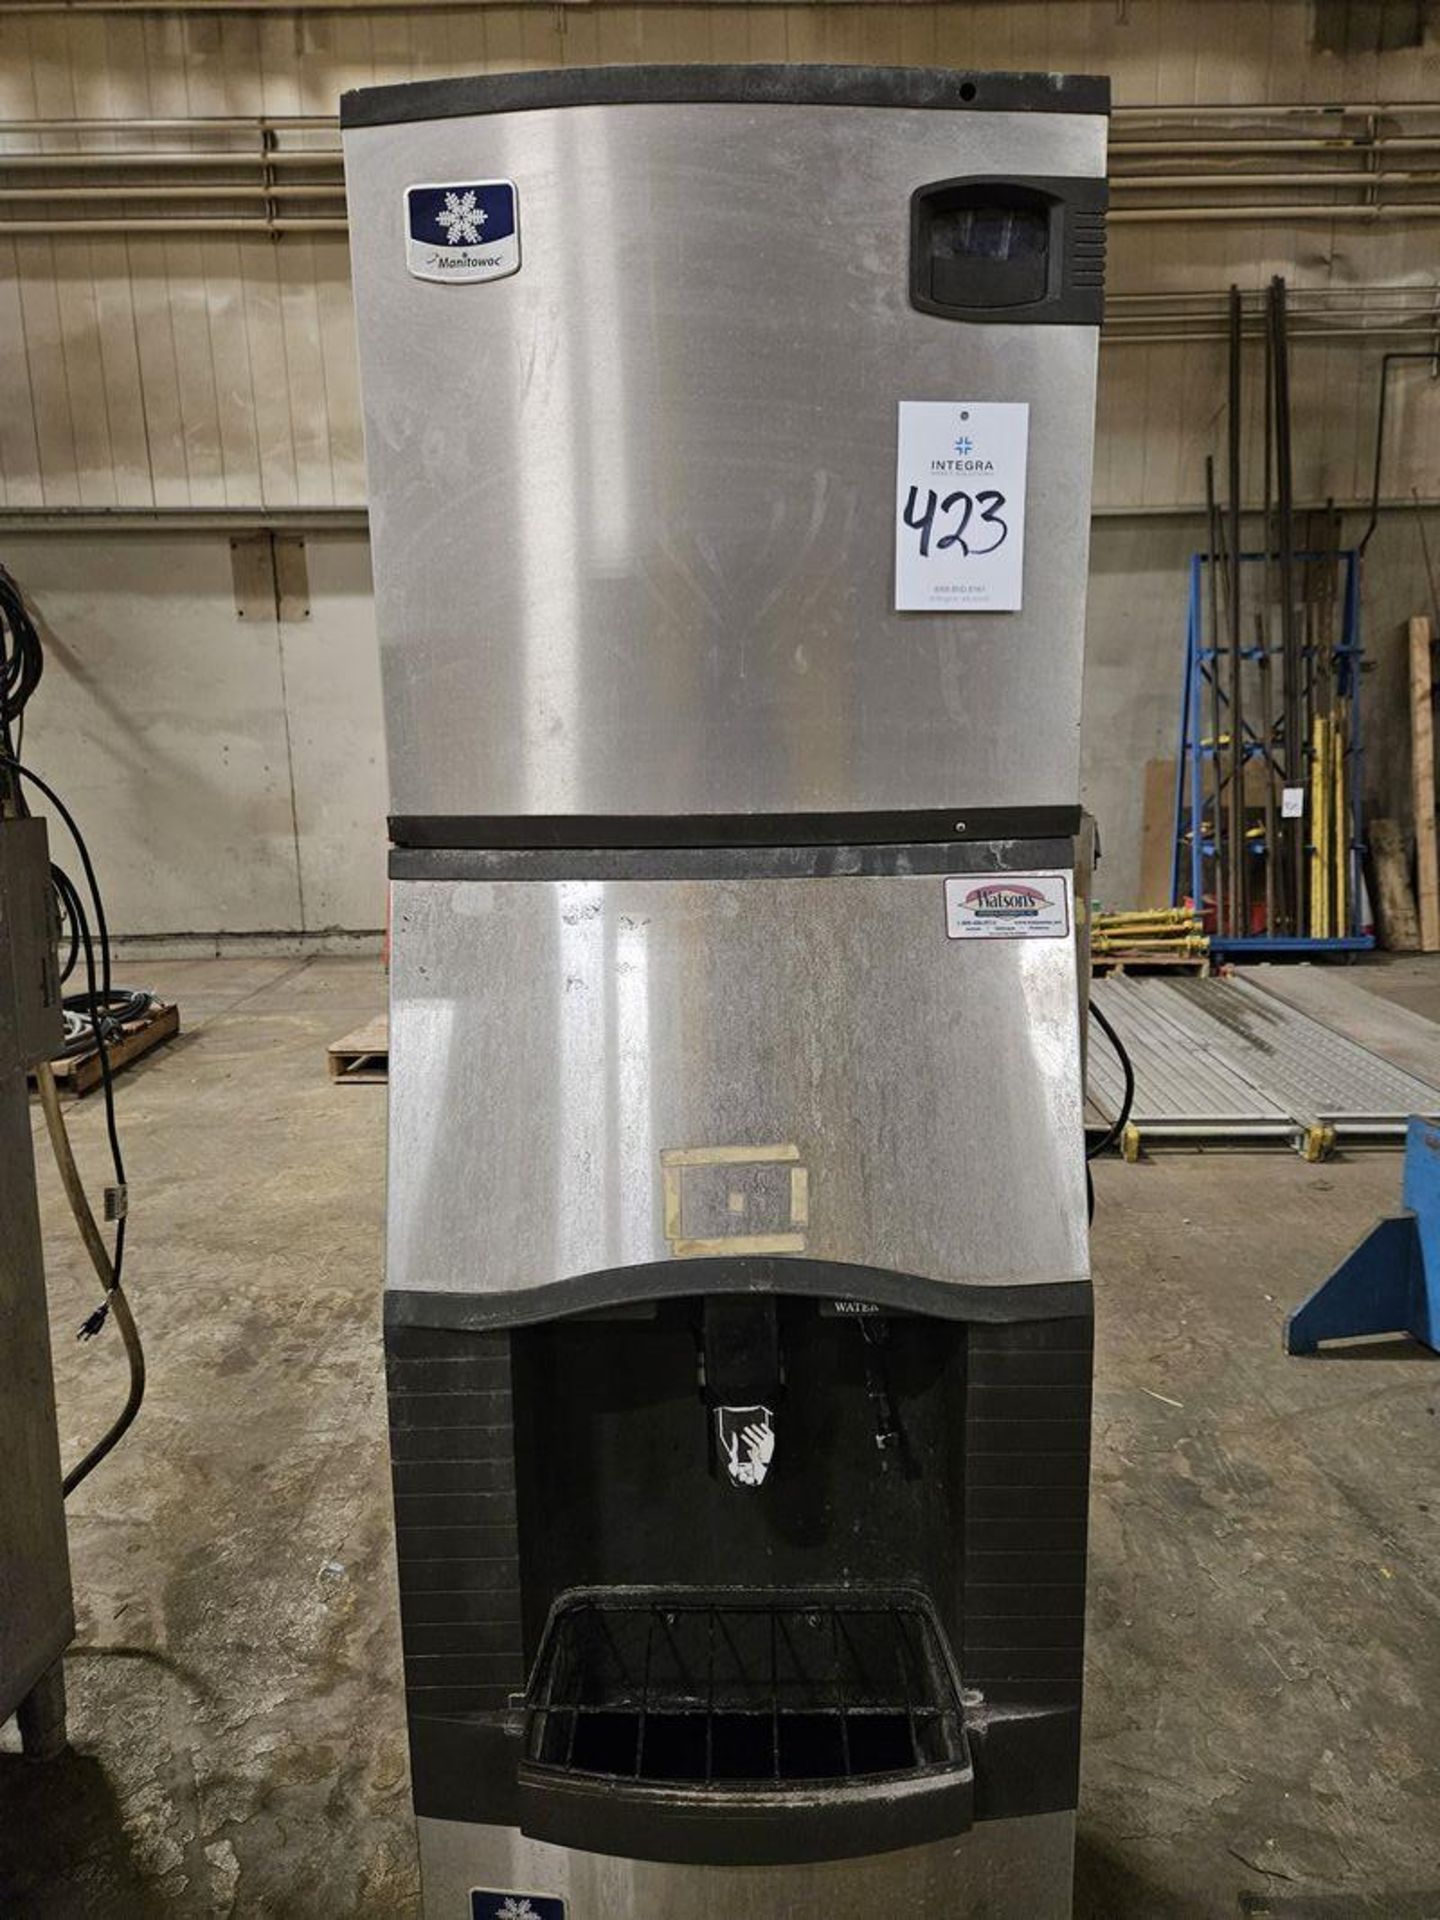 Manitowoc ID0322A-161 Ice Maker with SFA191 Ice Dispenser - Image 2 of 3